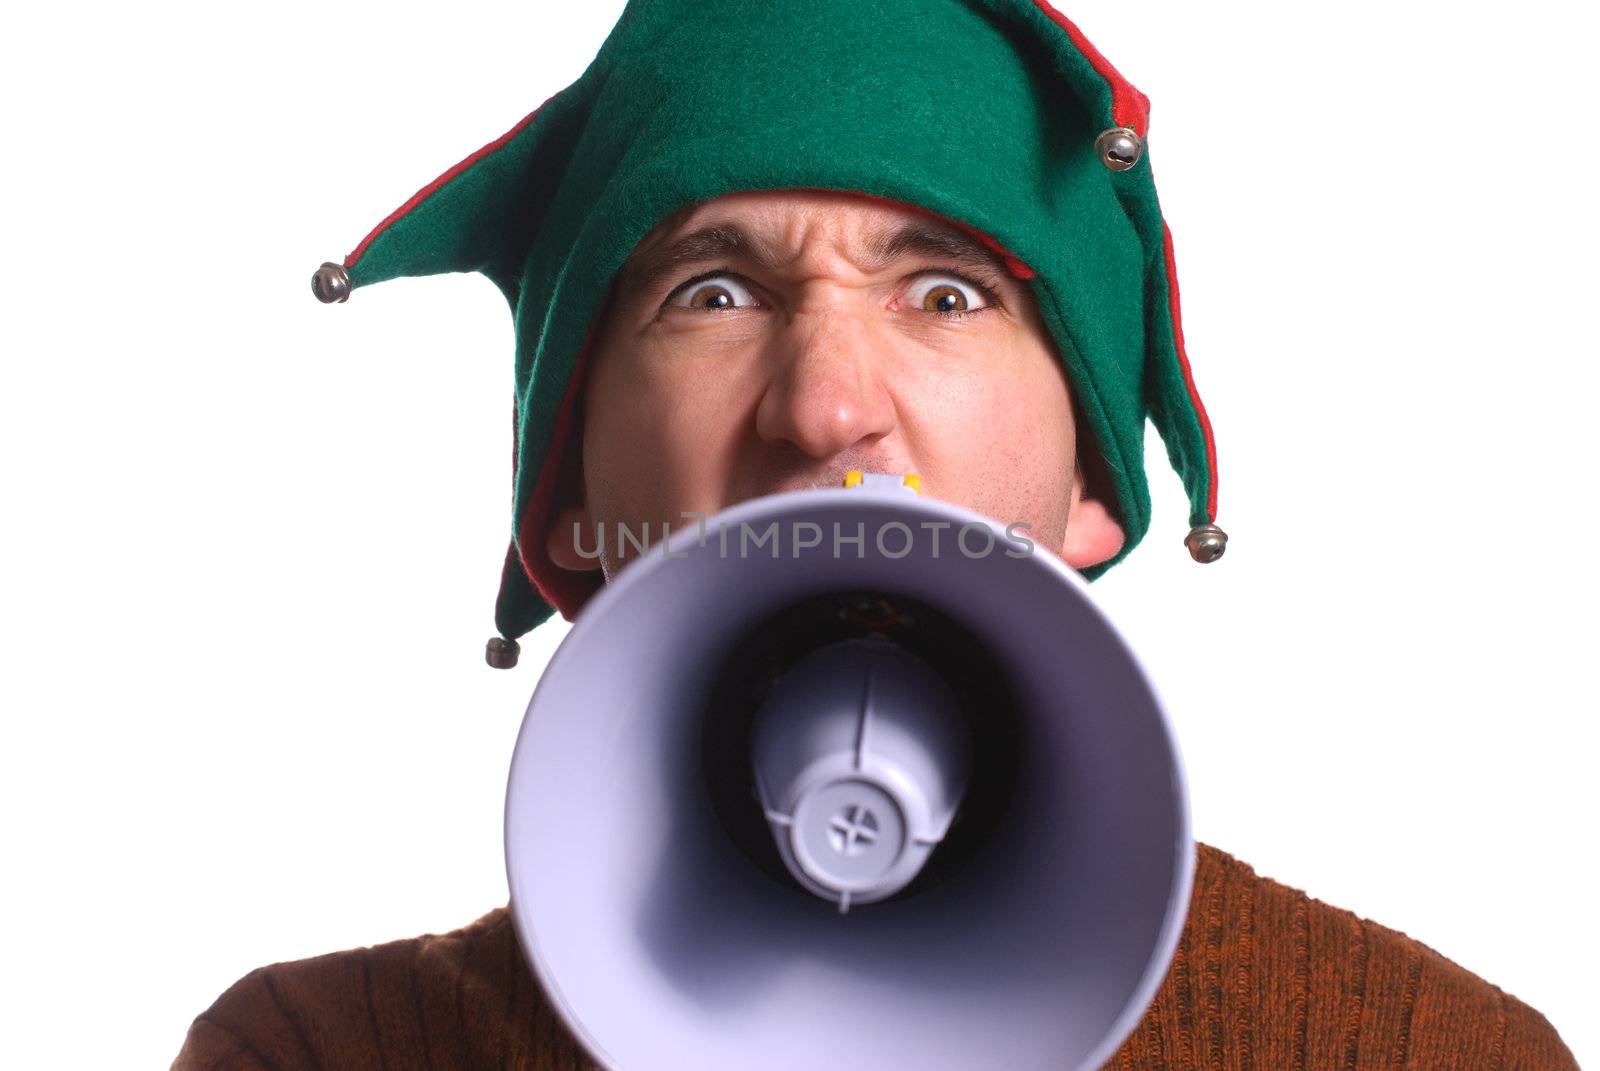 An adult Christmas elf is yelling into a megaphone and facing the camera